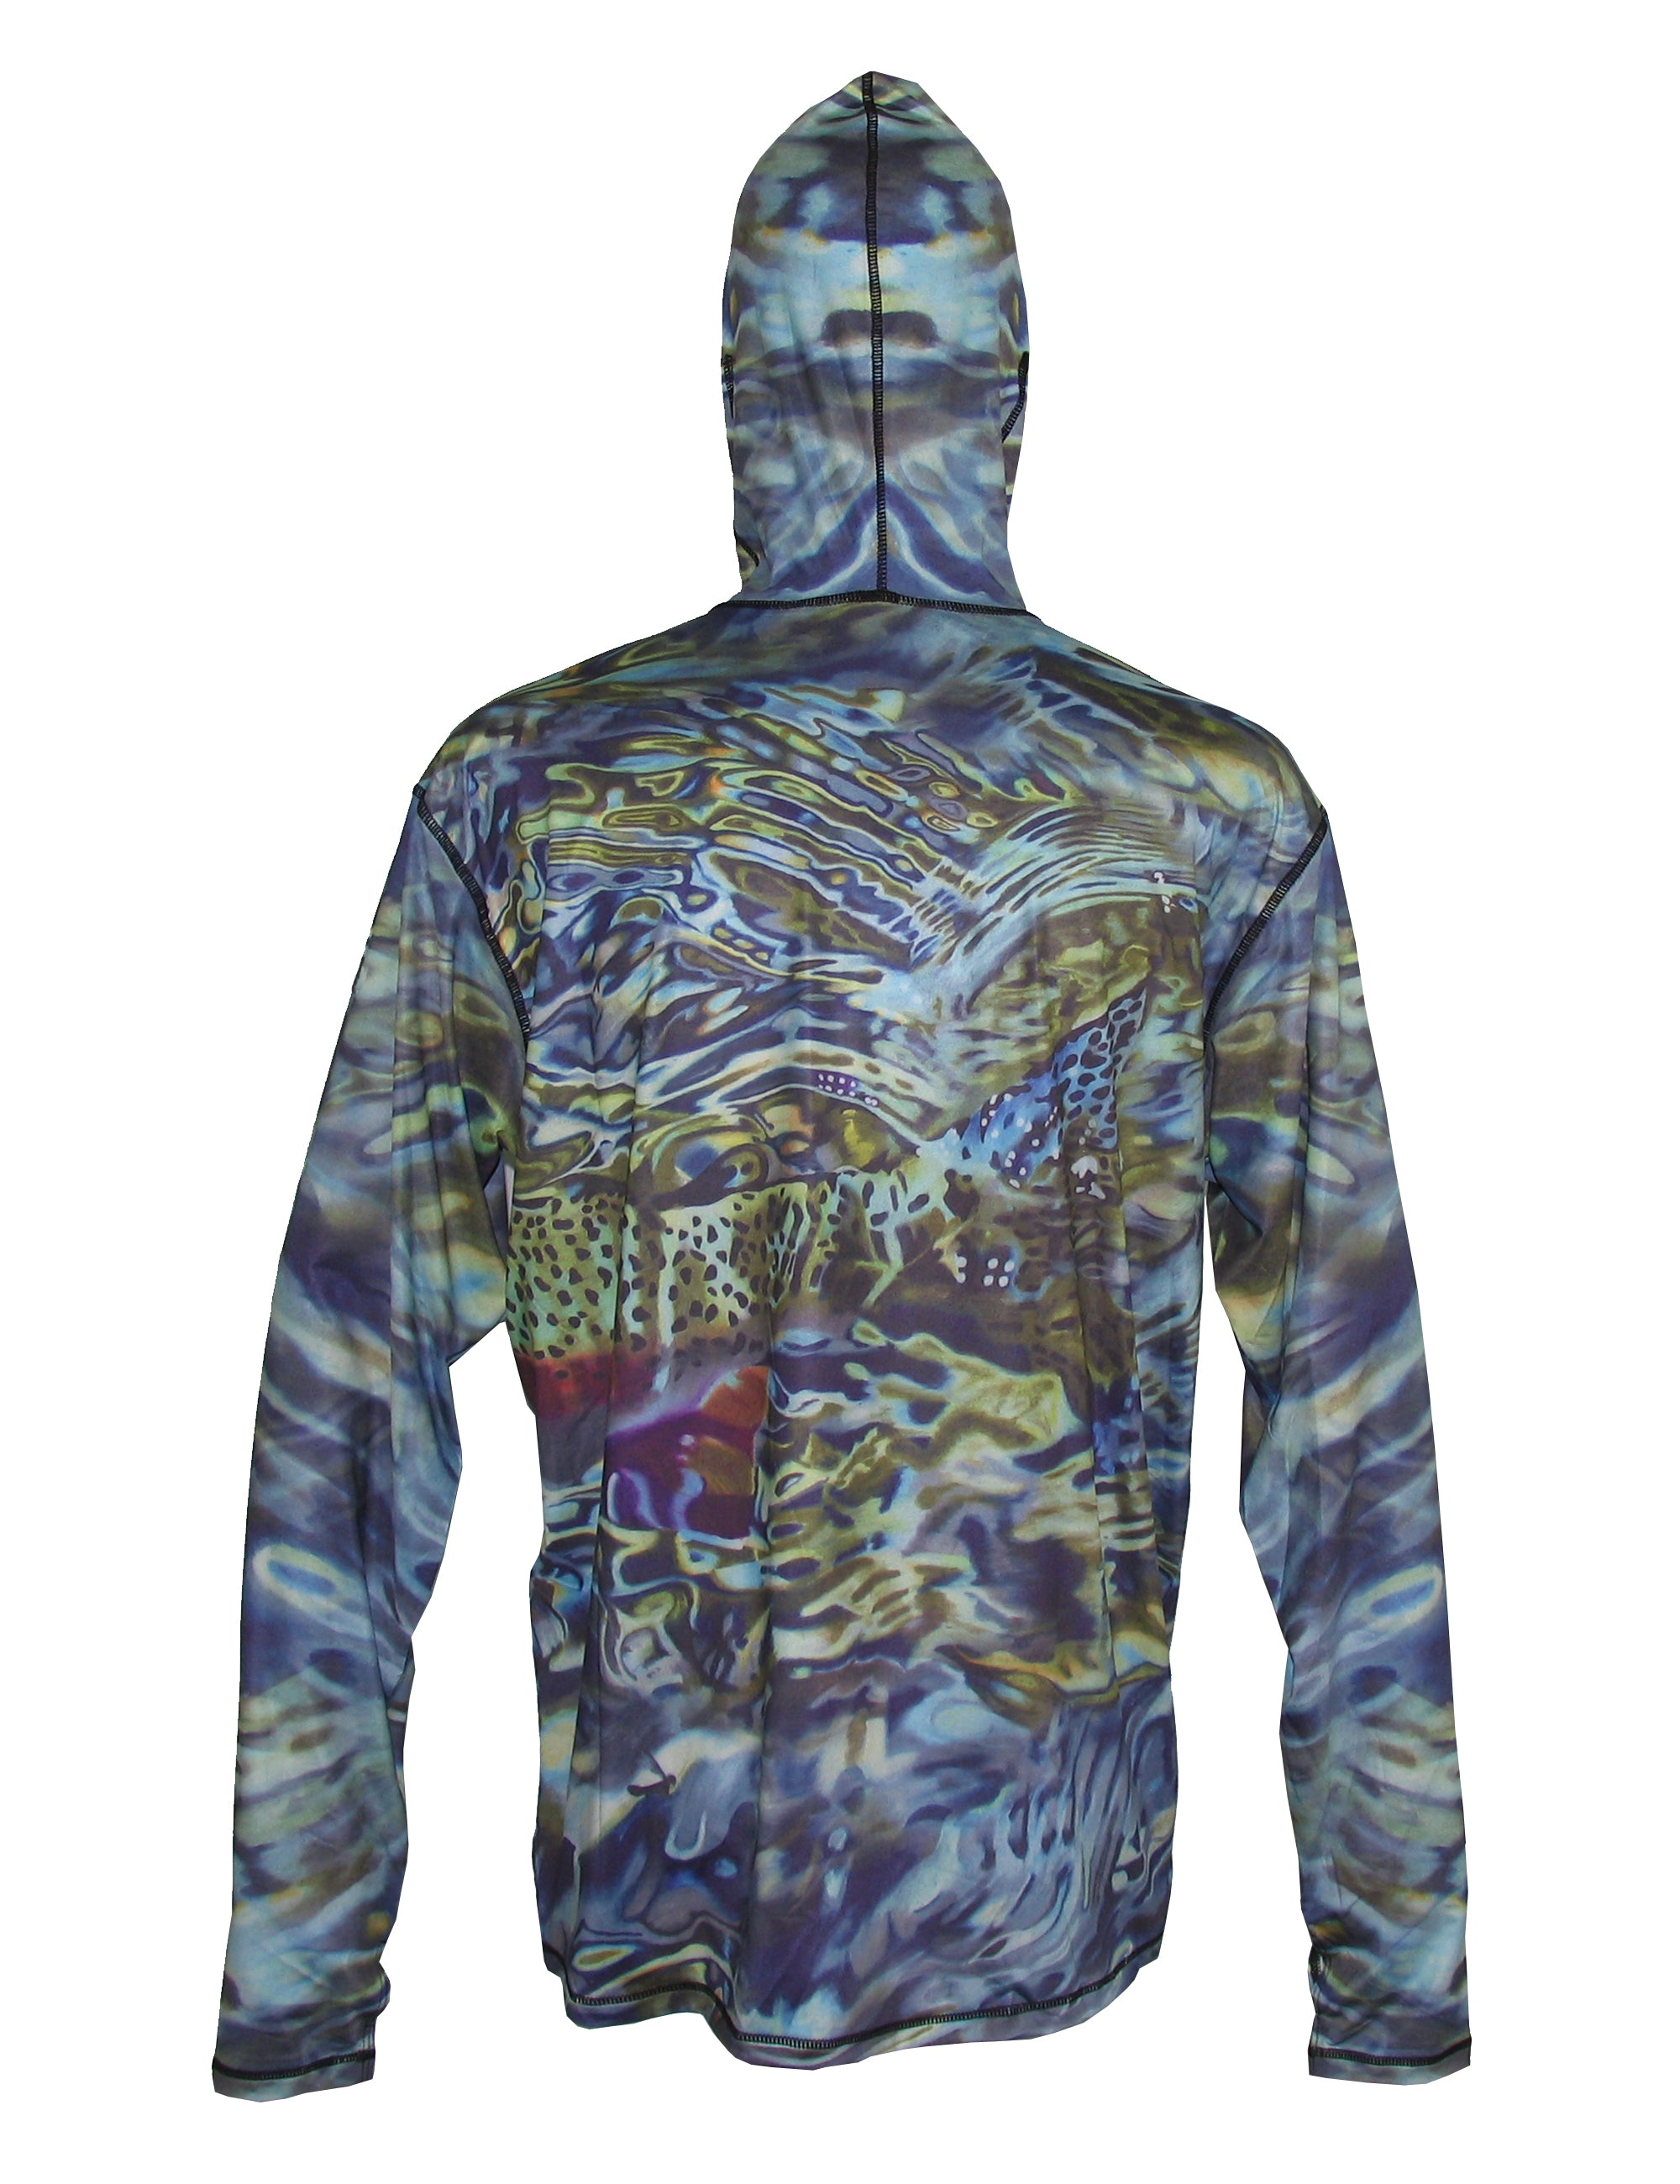 Fincognito Sunpro Hoodie Tranquilty Fish Print Fly Fishing